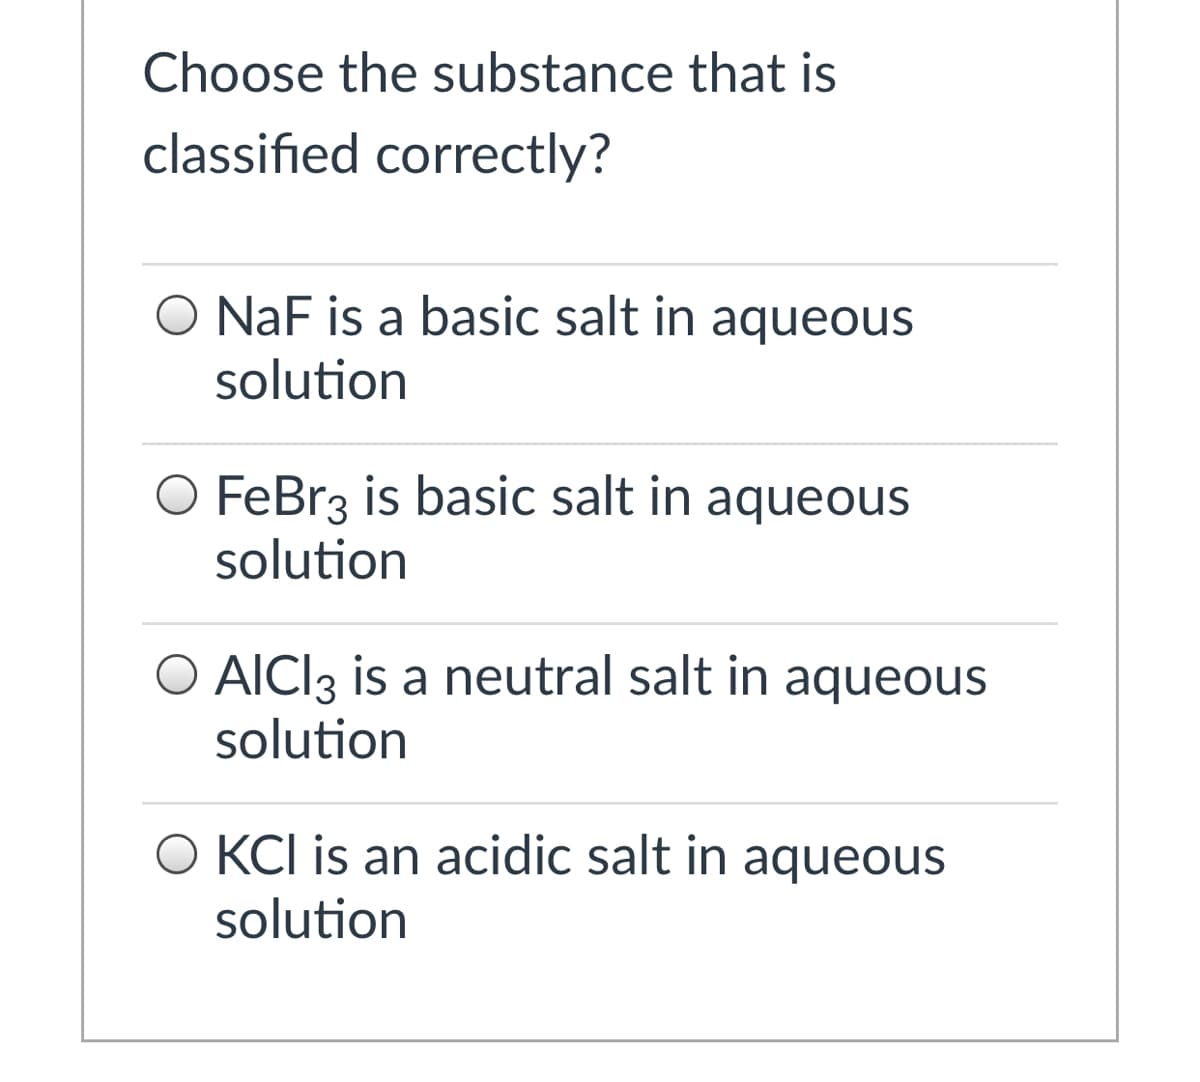 Choose the substance that is
classified correctly?
O NaF is a basic salt in aqueous
solution
O FeBr3 is basic salt in aqueous
solution
O AICI3 is a neutral salt in aqueous
solution
O KCI is an acidic salt in aqueous
solution
